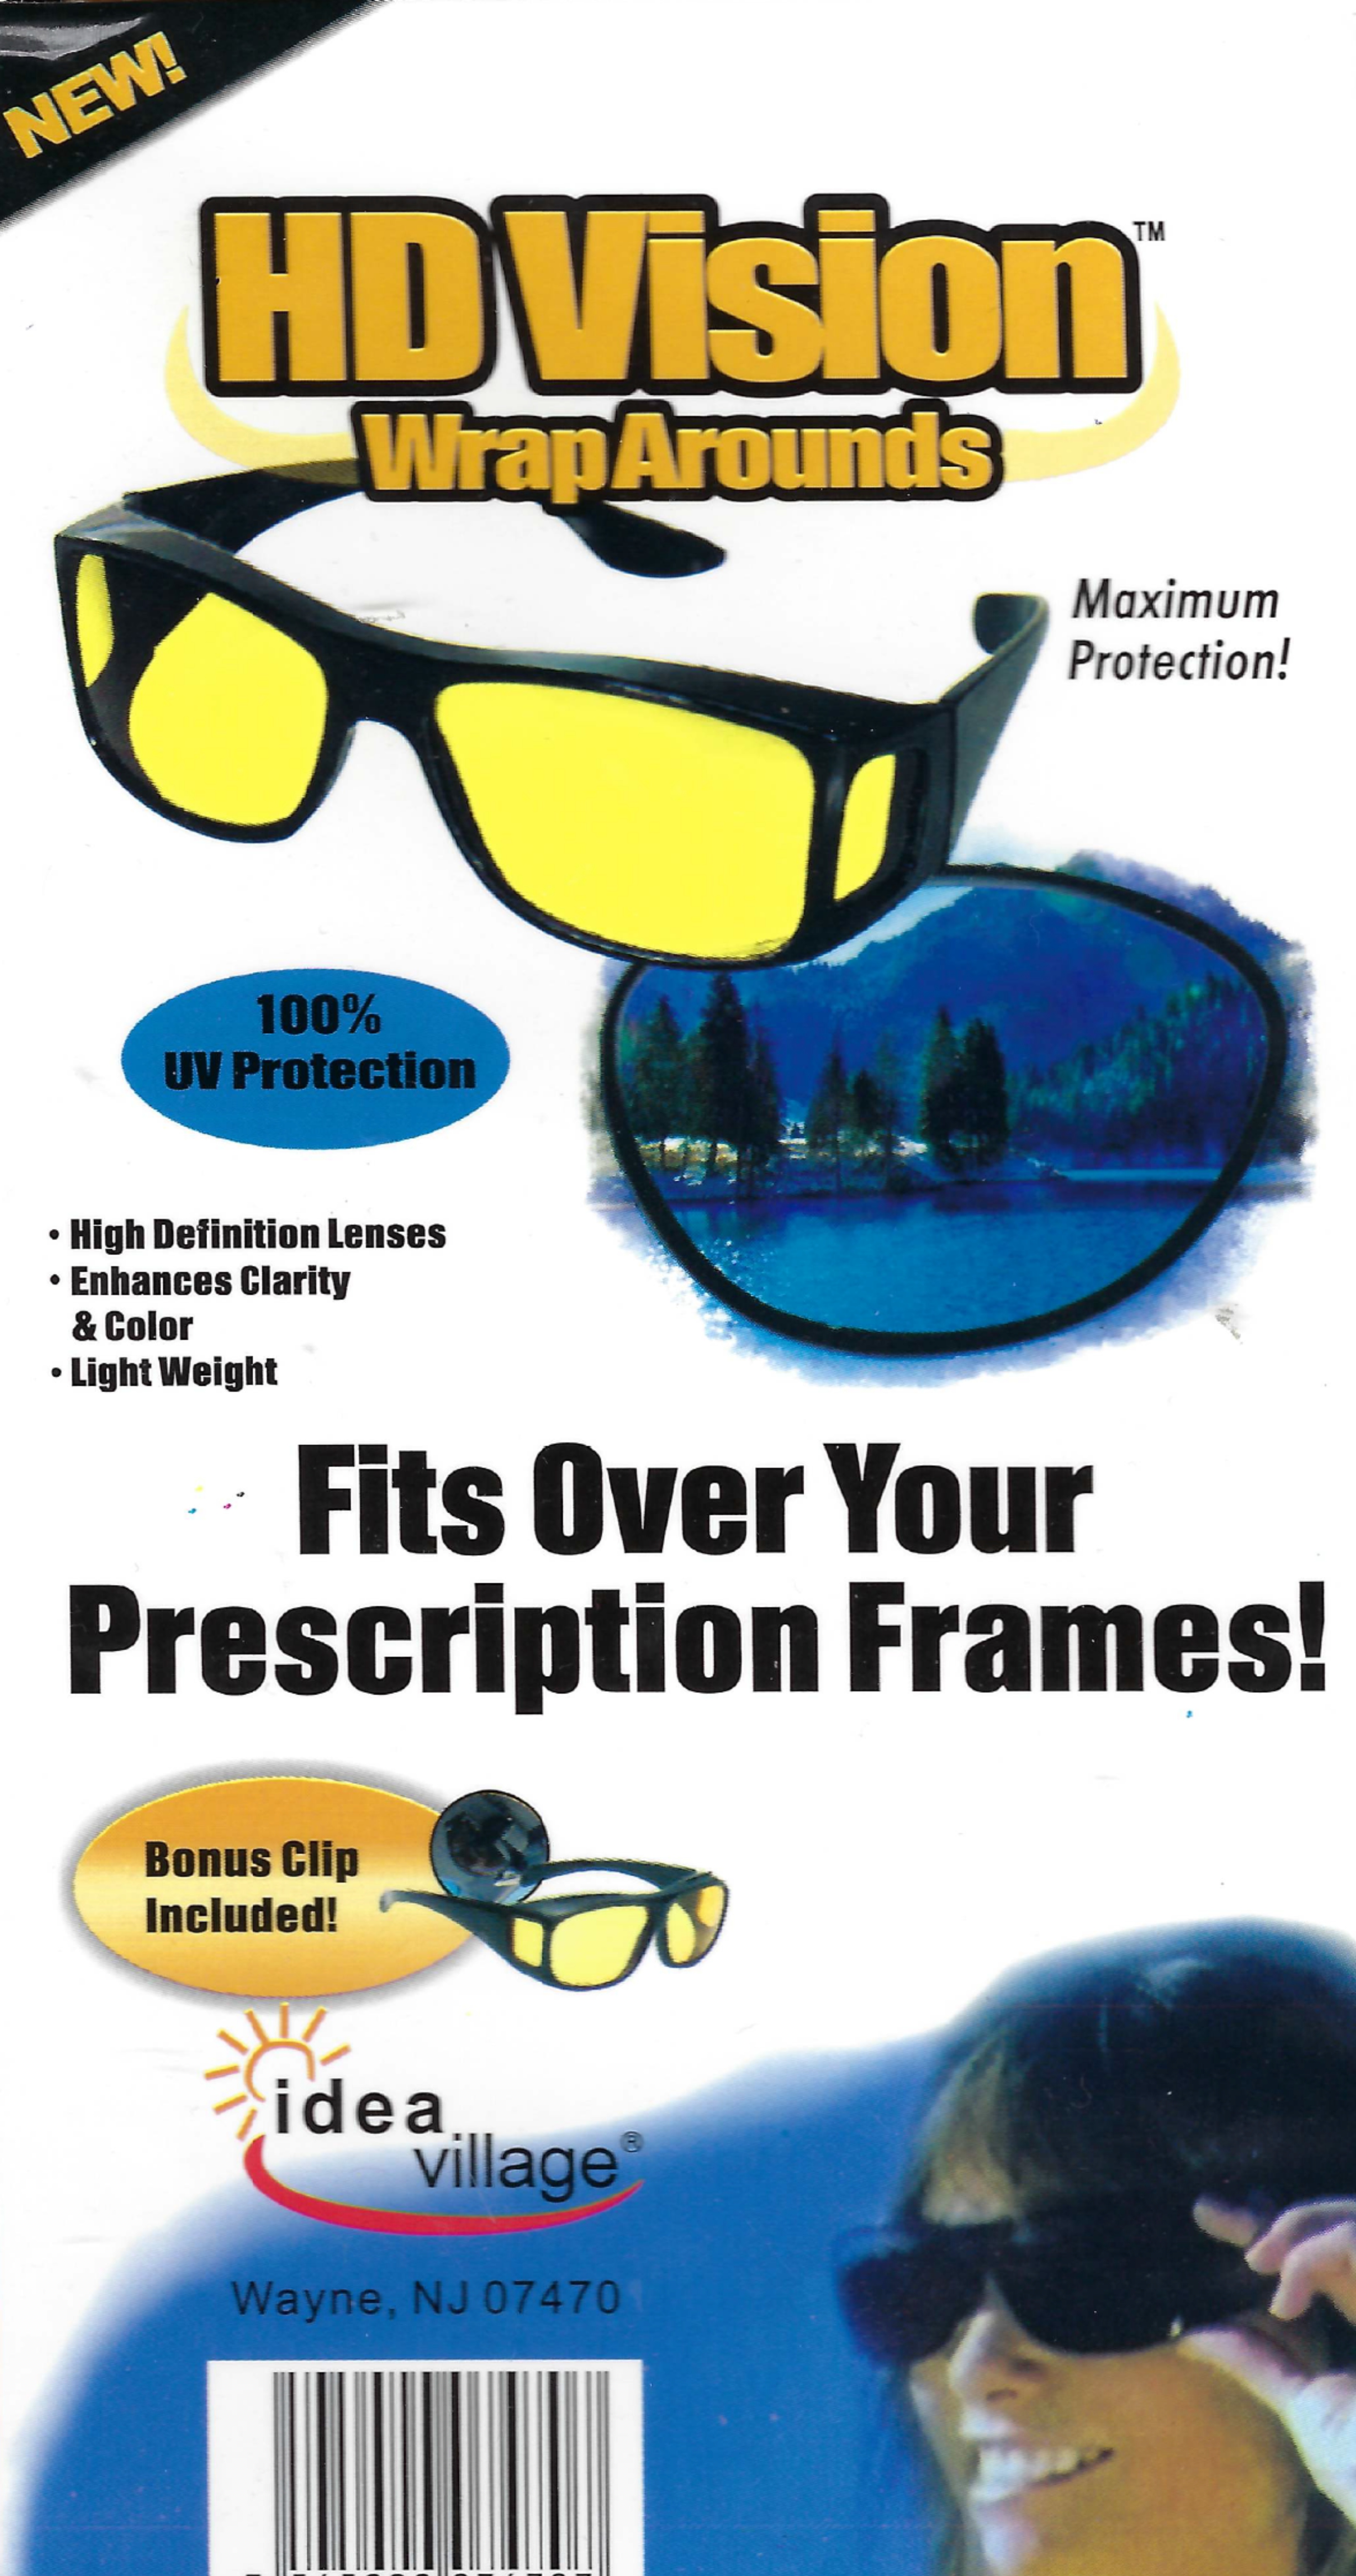 HD Night & Day Vision Wraparound Sunglasses, As Seen on TV, Fits over Glasses Bonus Pair Included - image 2 of 6